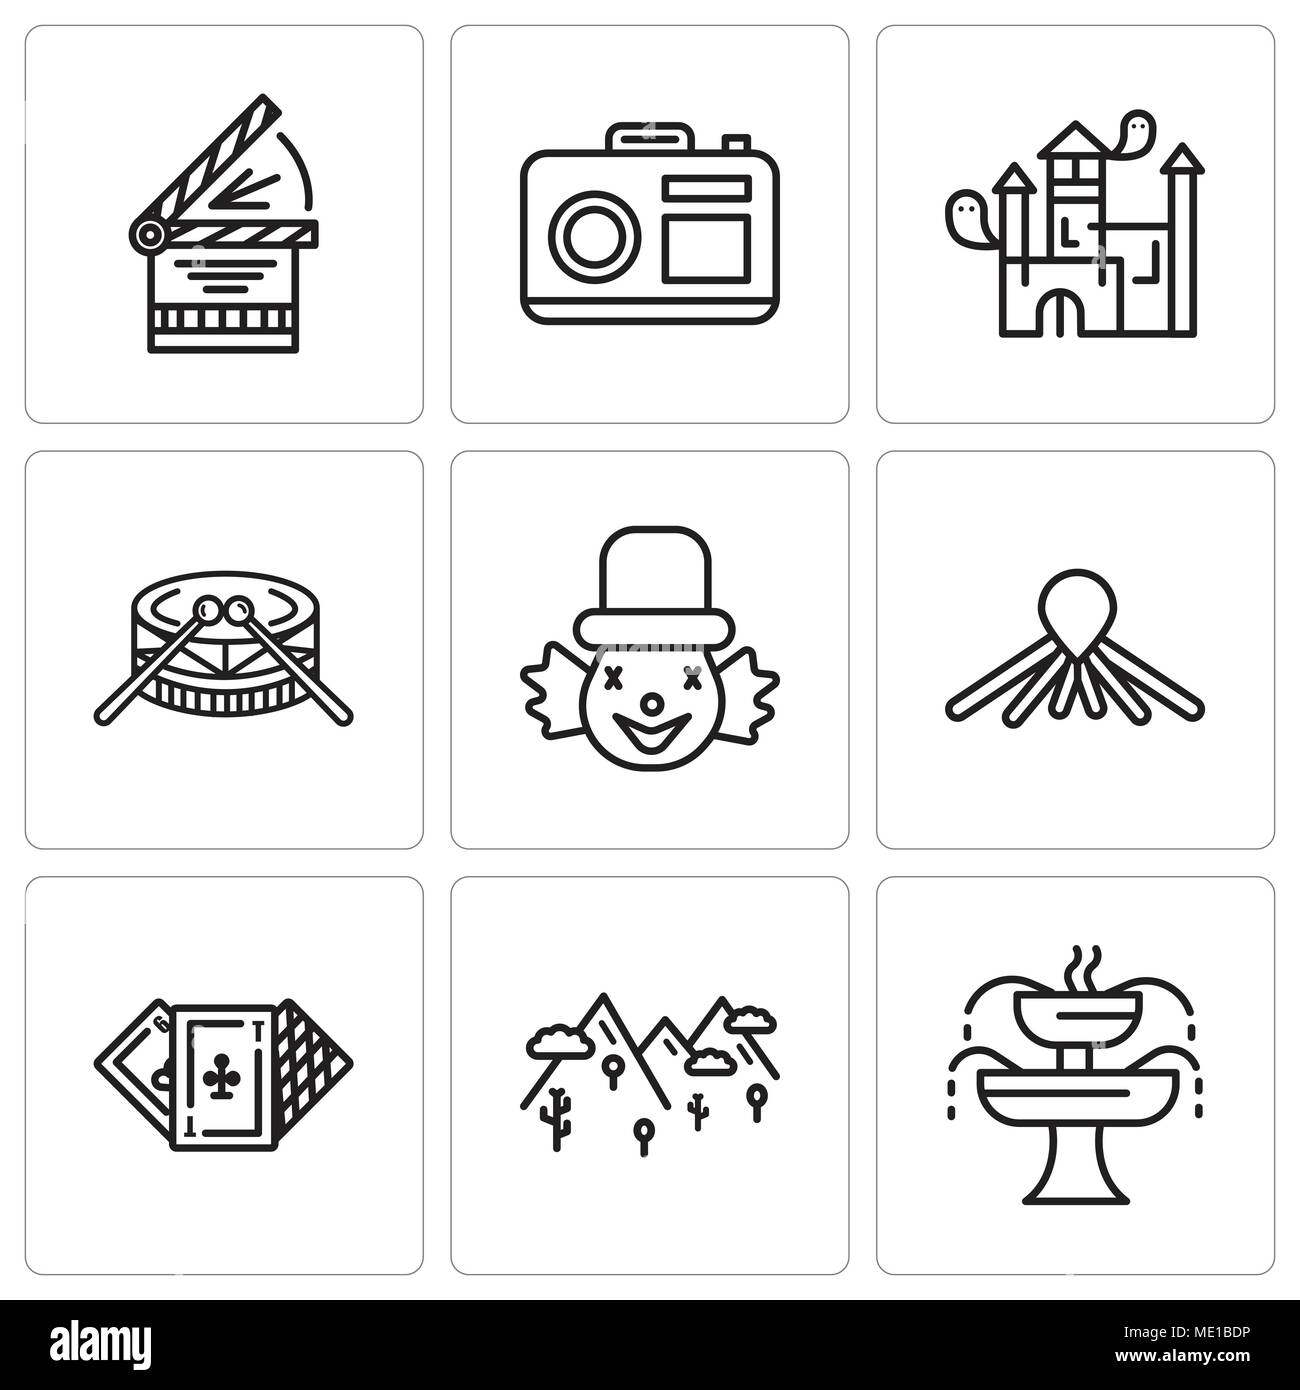 Set Of 9 simple editable icons such as Fountain, Mountains, Casino, Balloon dog, Clown, Drums, House, Camera, Clapperboard, can be used for mobile, we Stock Vector